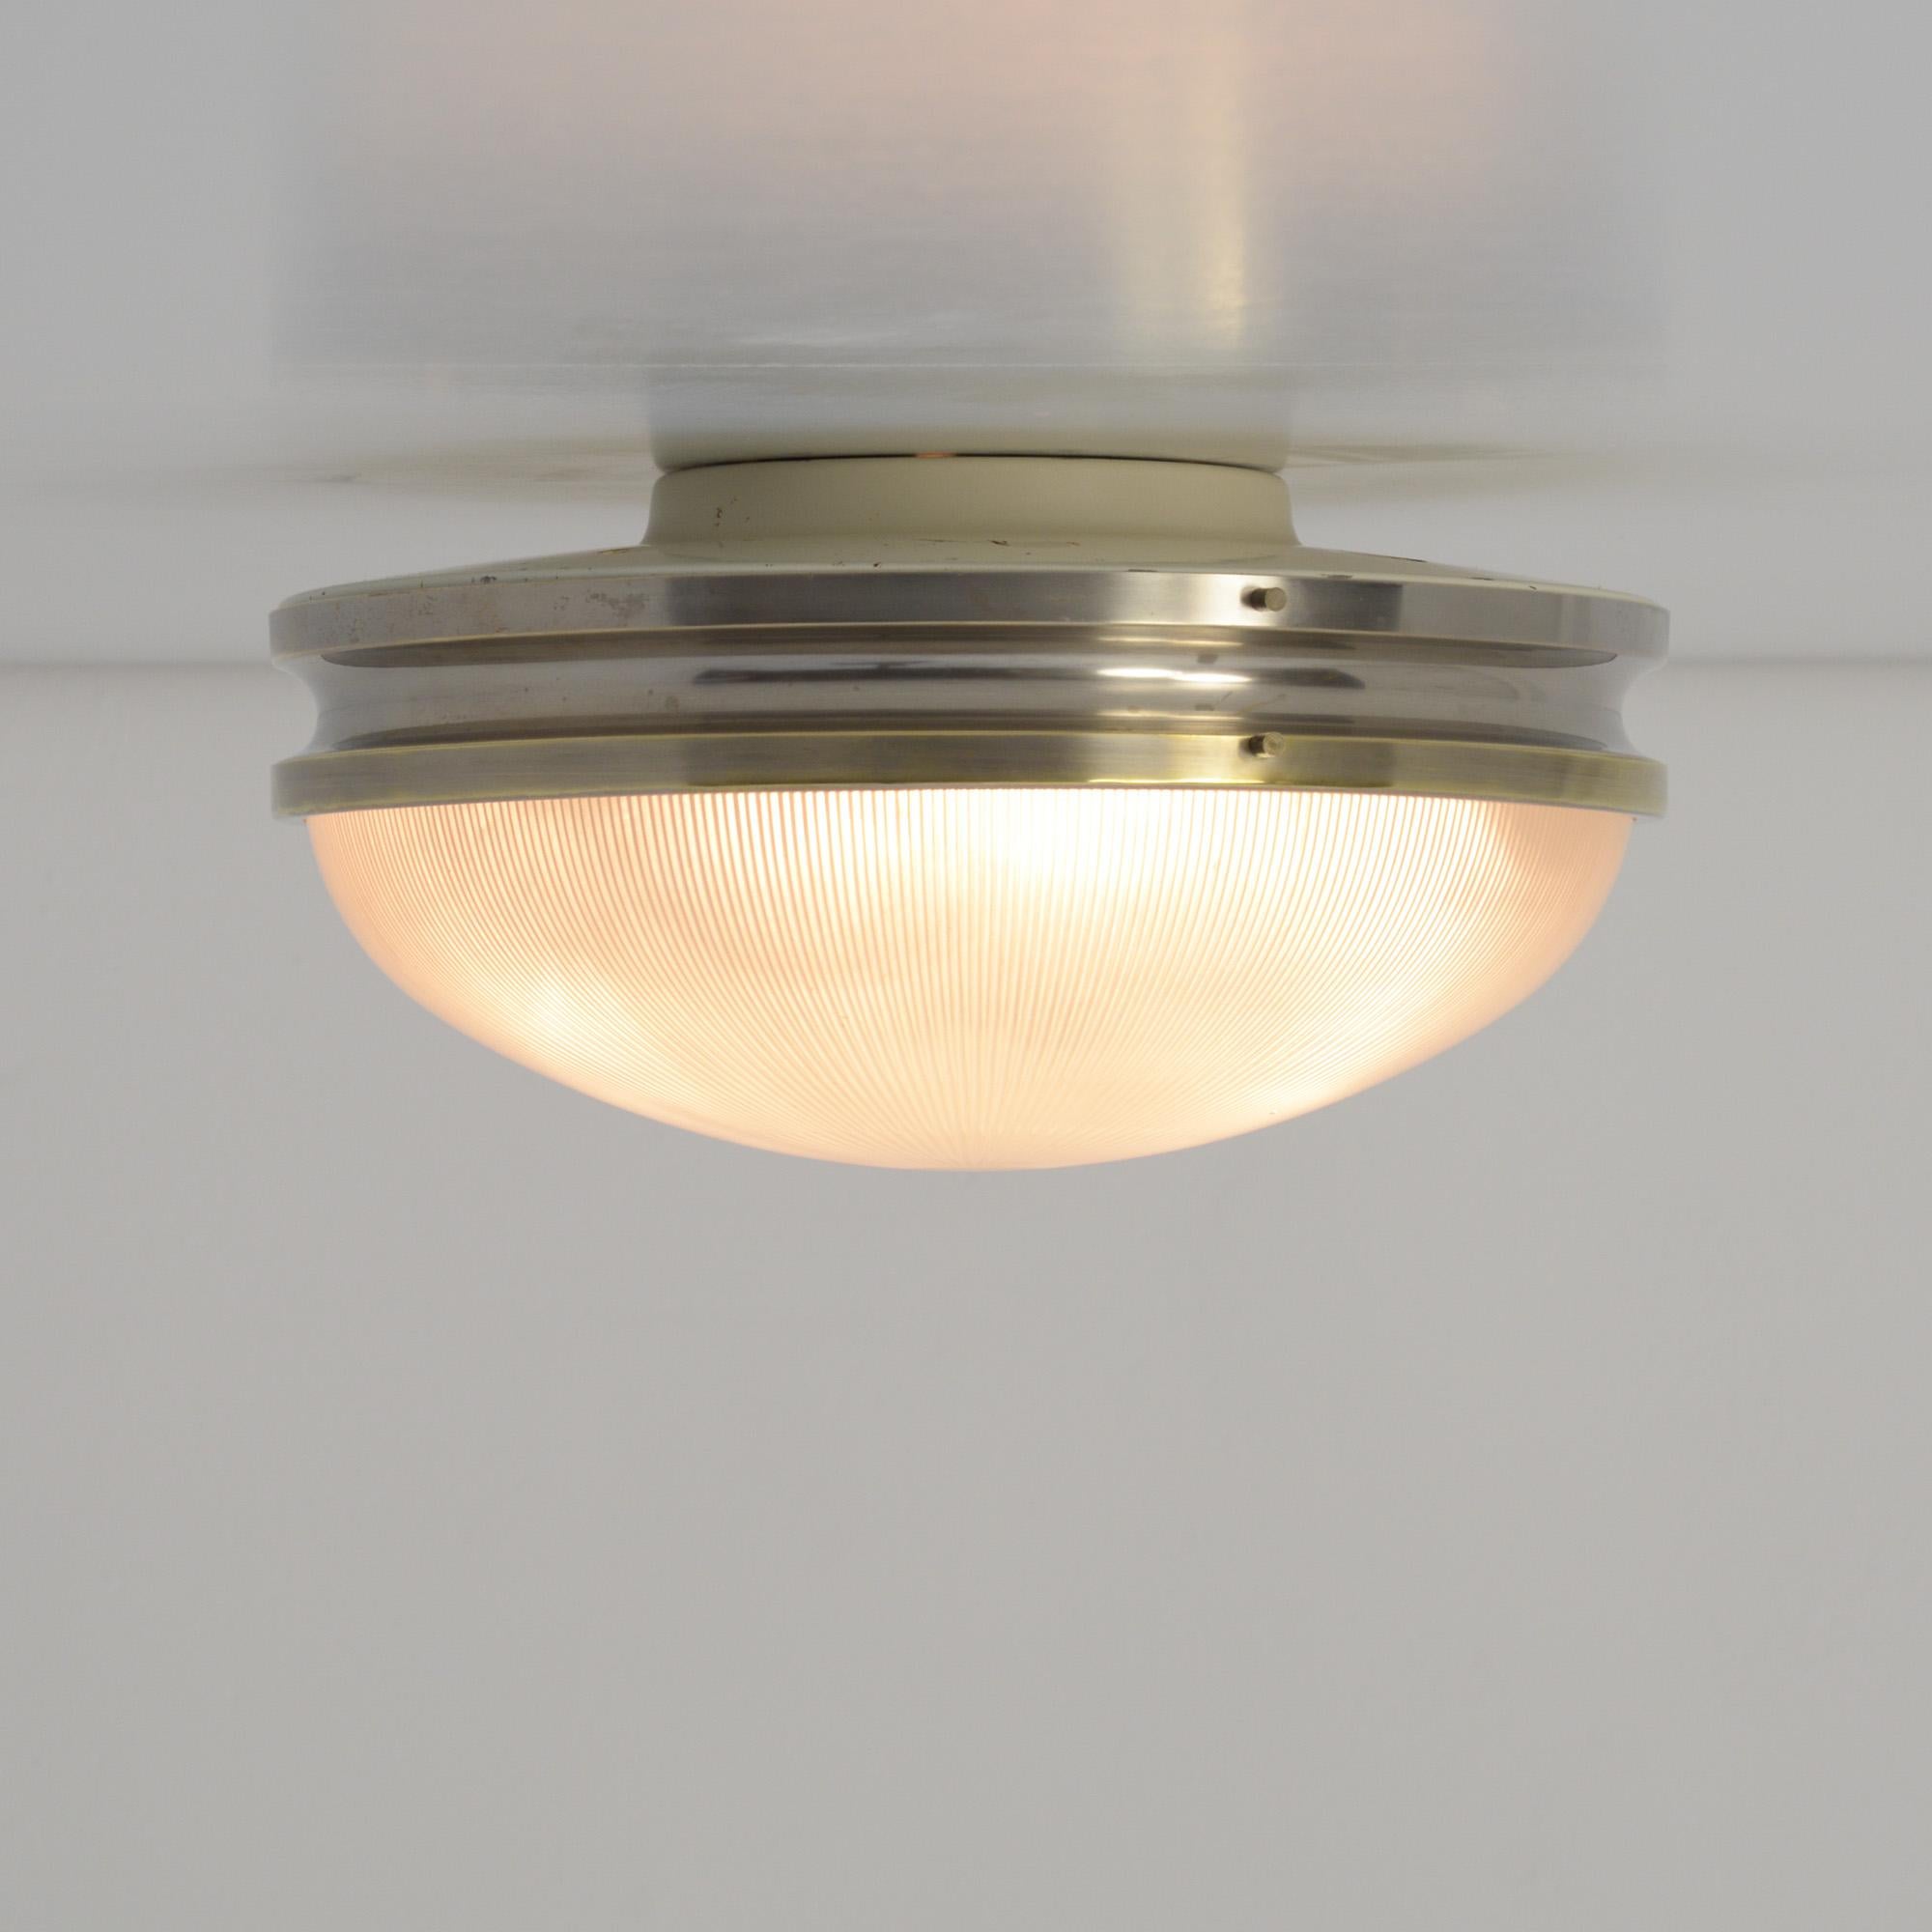 The sigma ceiling lamp was created by Sergio Mazza for Artemide in the 1960s.
The lamp is made of nickeled brass and pressed glass.
We offer you a pair. The lamps were created as ceiling lamps but can also be used as wall lamps.
Both lamps are in